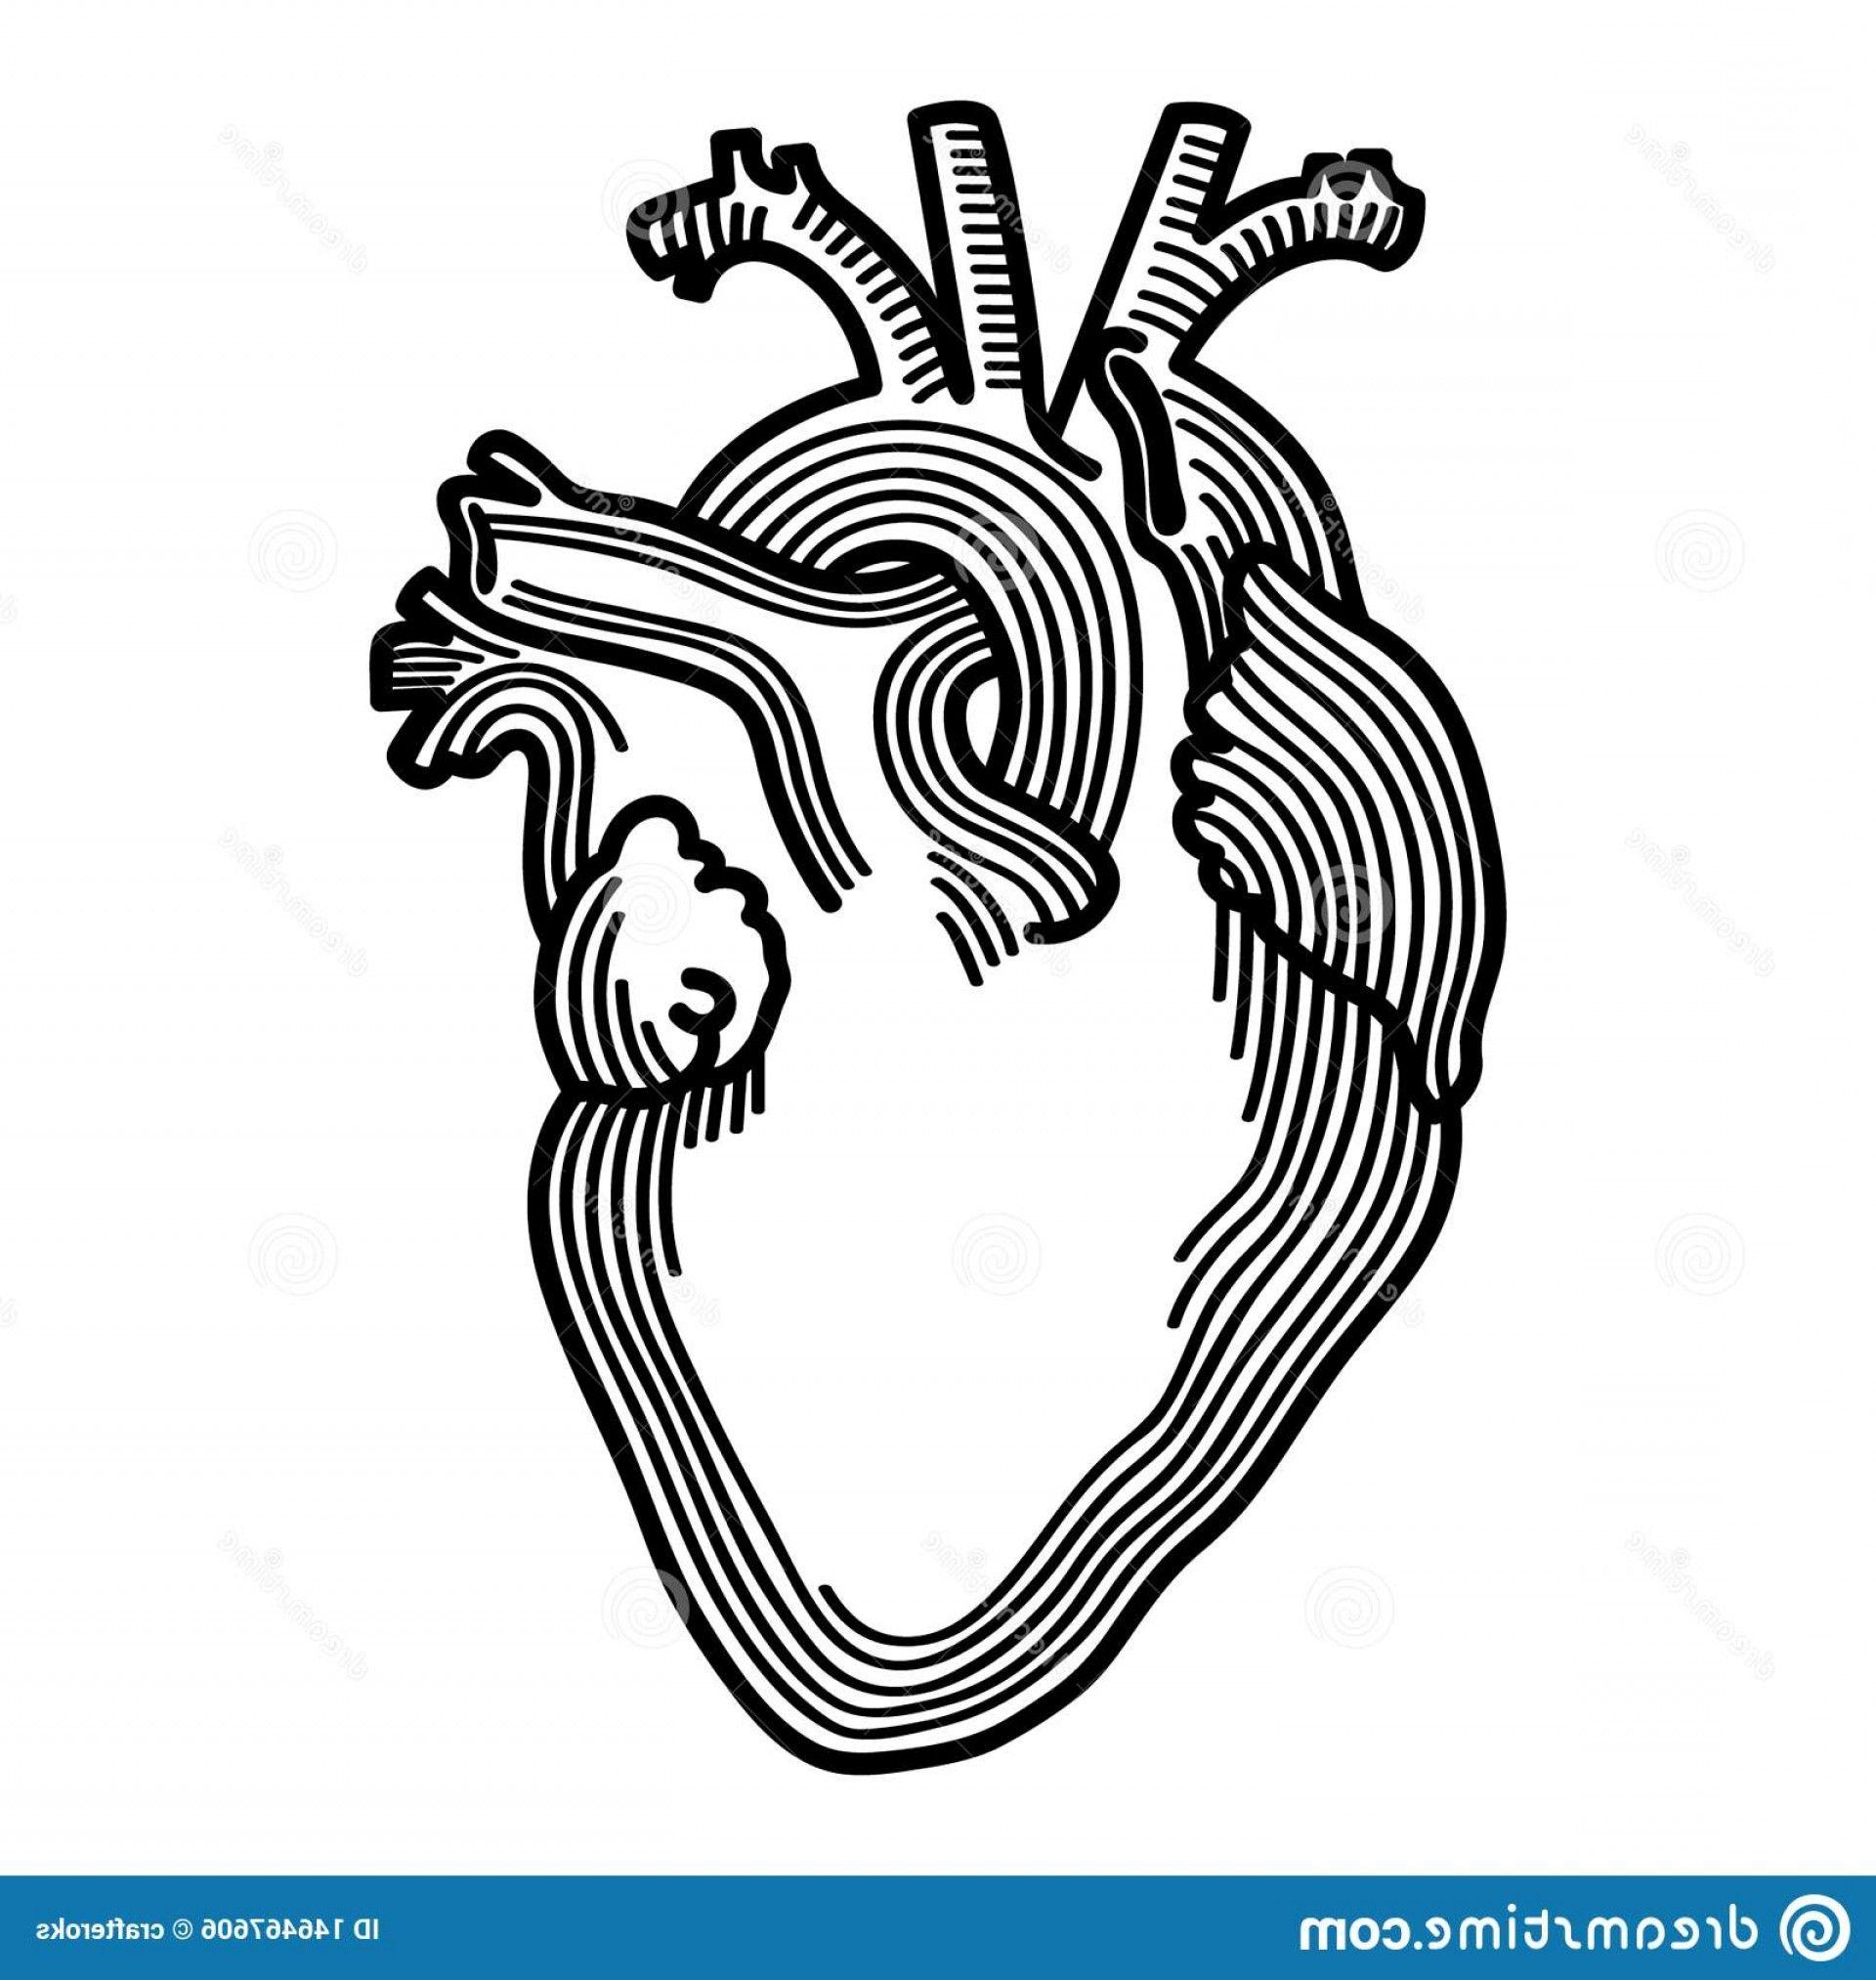 Download 33 Anatomical Heart Svg Free Gif Free Svg Files Silhouette And Cricut Cutting Files